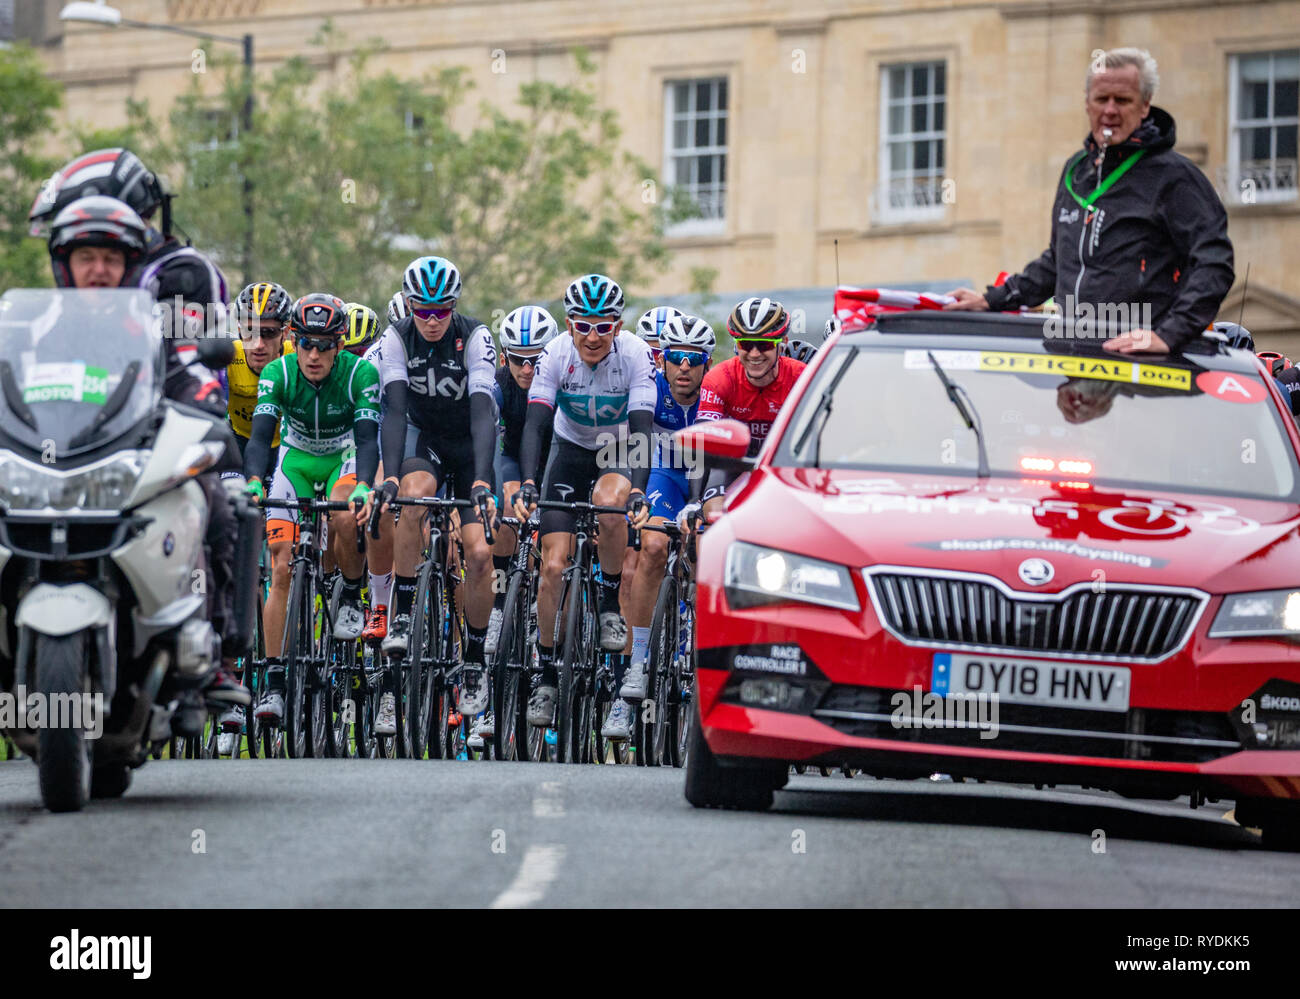 Official marshall car and peleton in the OVO Energy Tour of Britain bike race stage 3 as it passes through Clifton in Brstol UK on September 4th 2018 Stock Photo